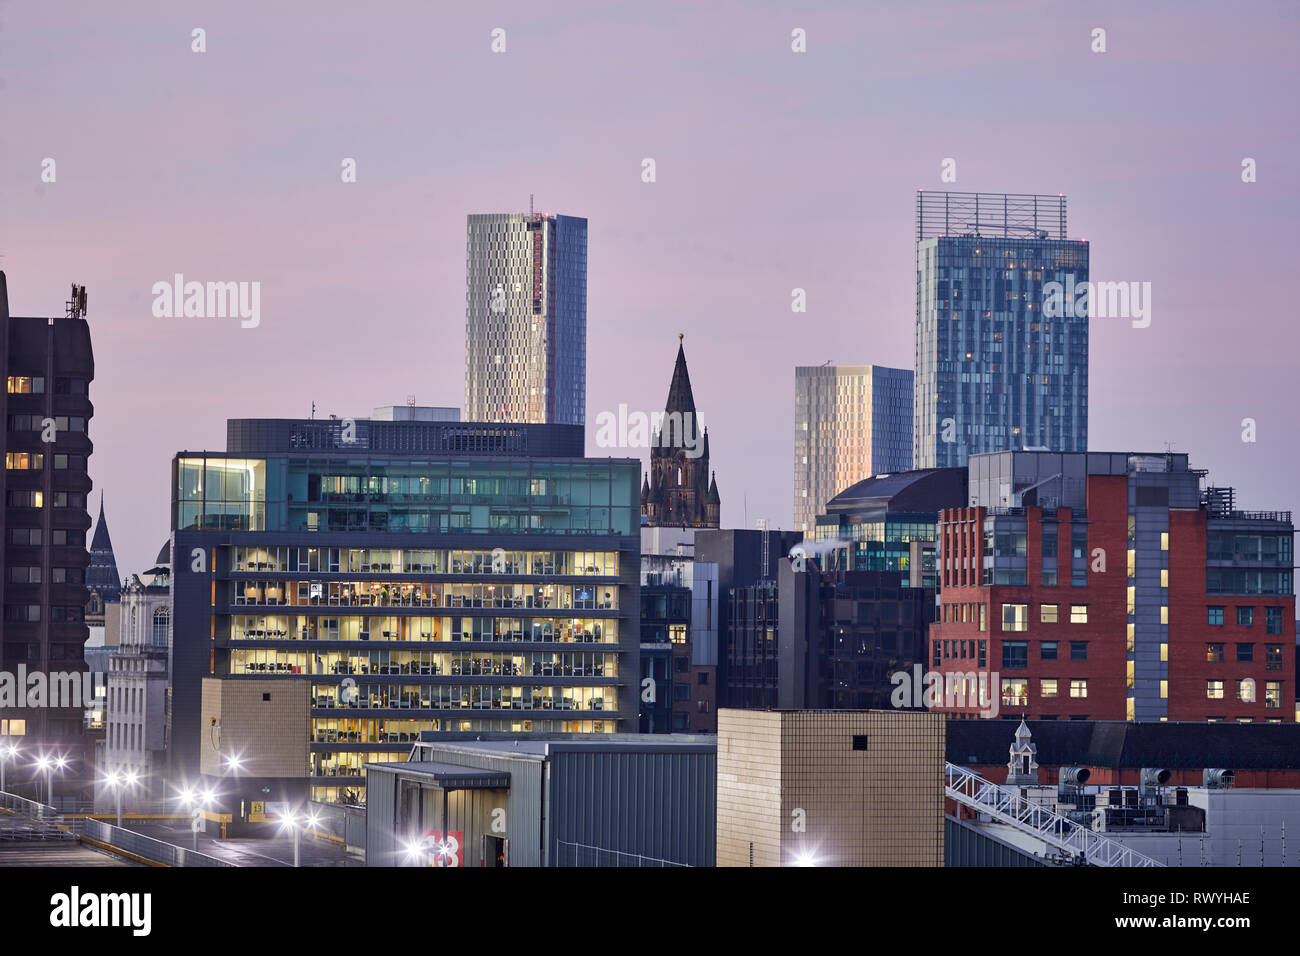 Dawn first light Manchester skyline from above looking to the Town hall and Deansgate Square Stock Photo